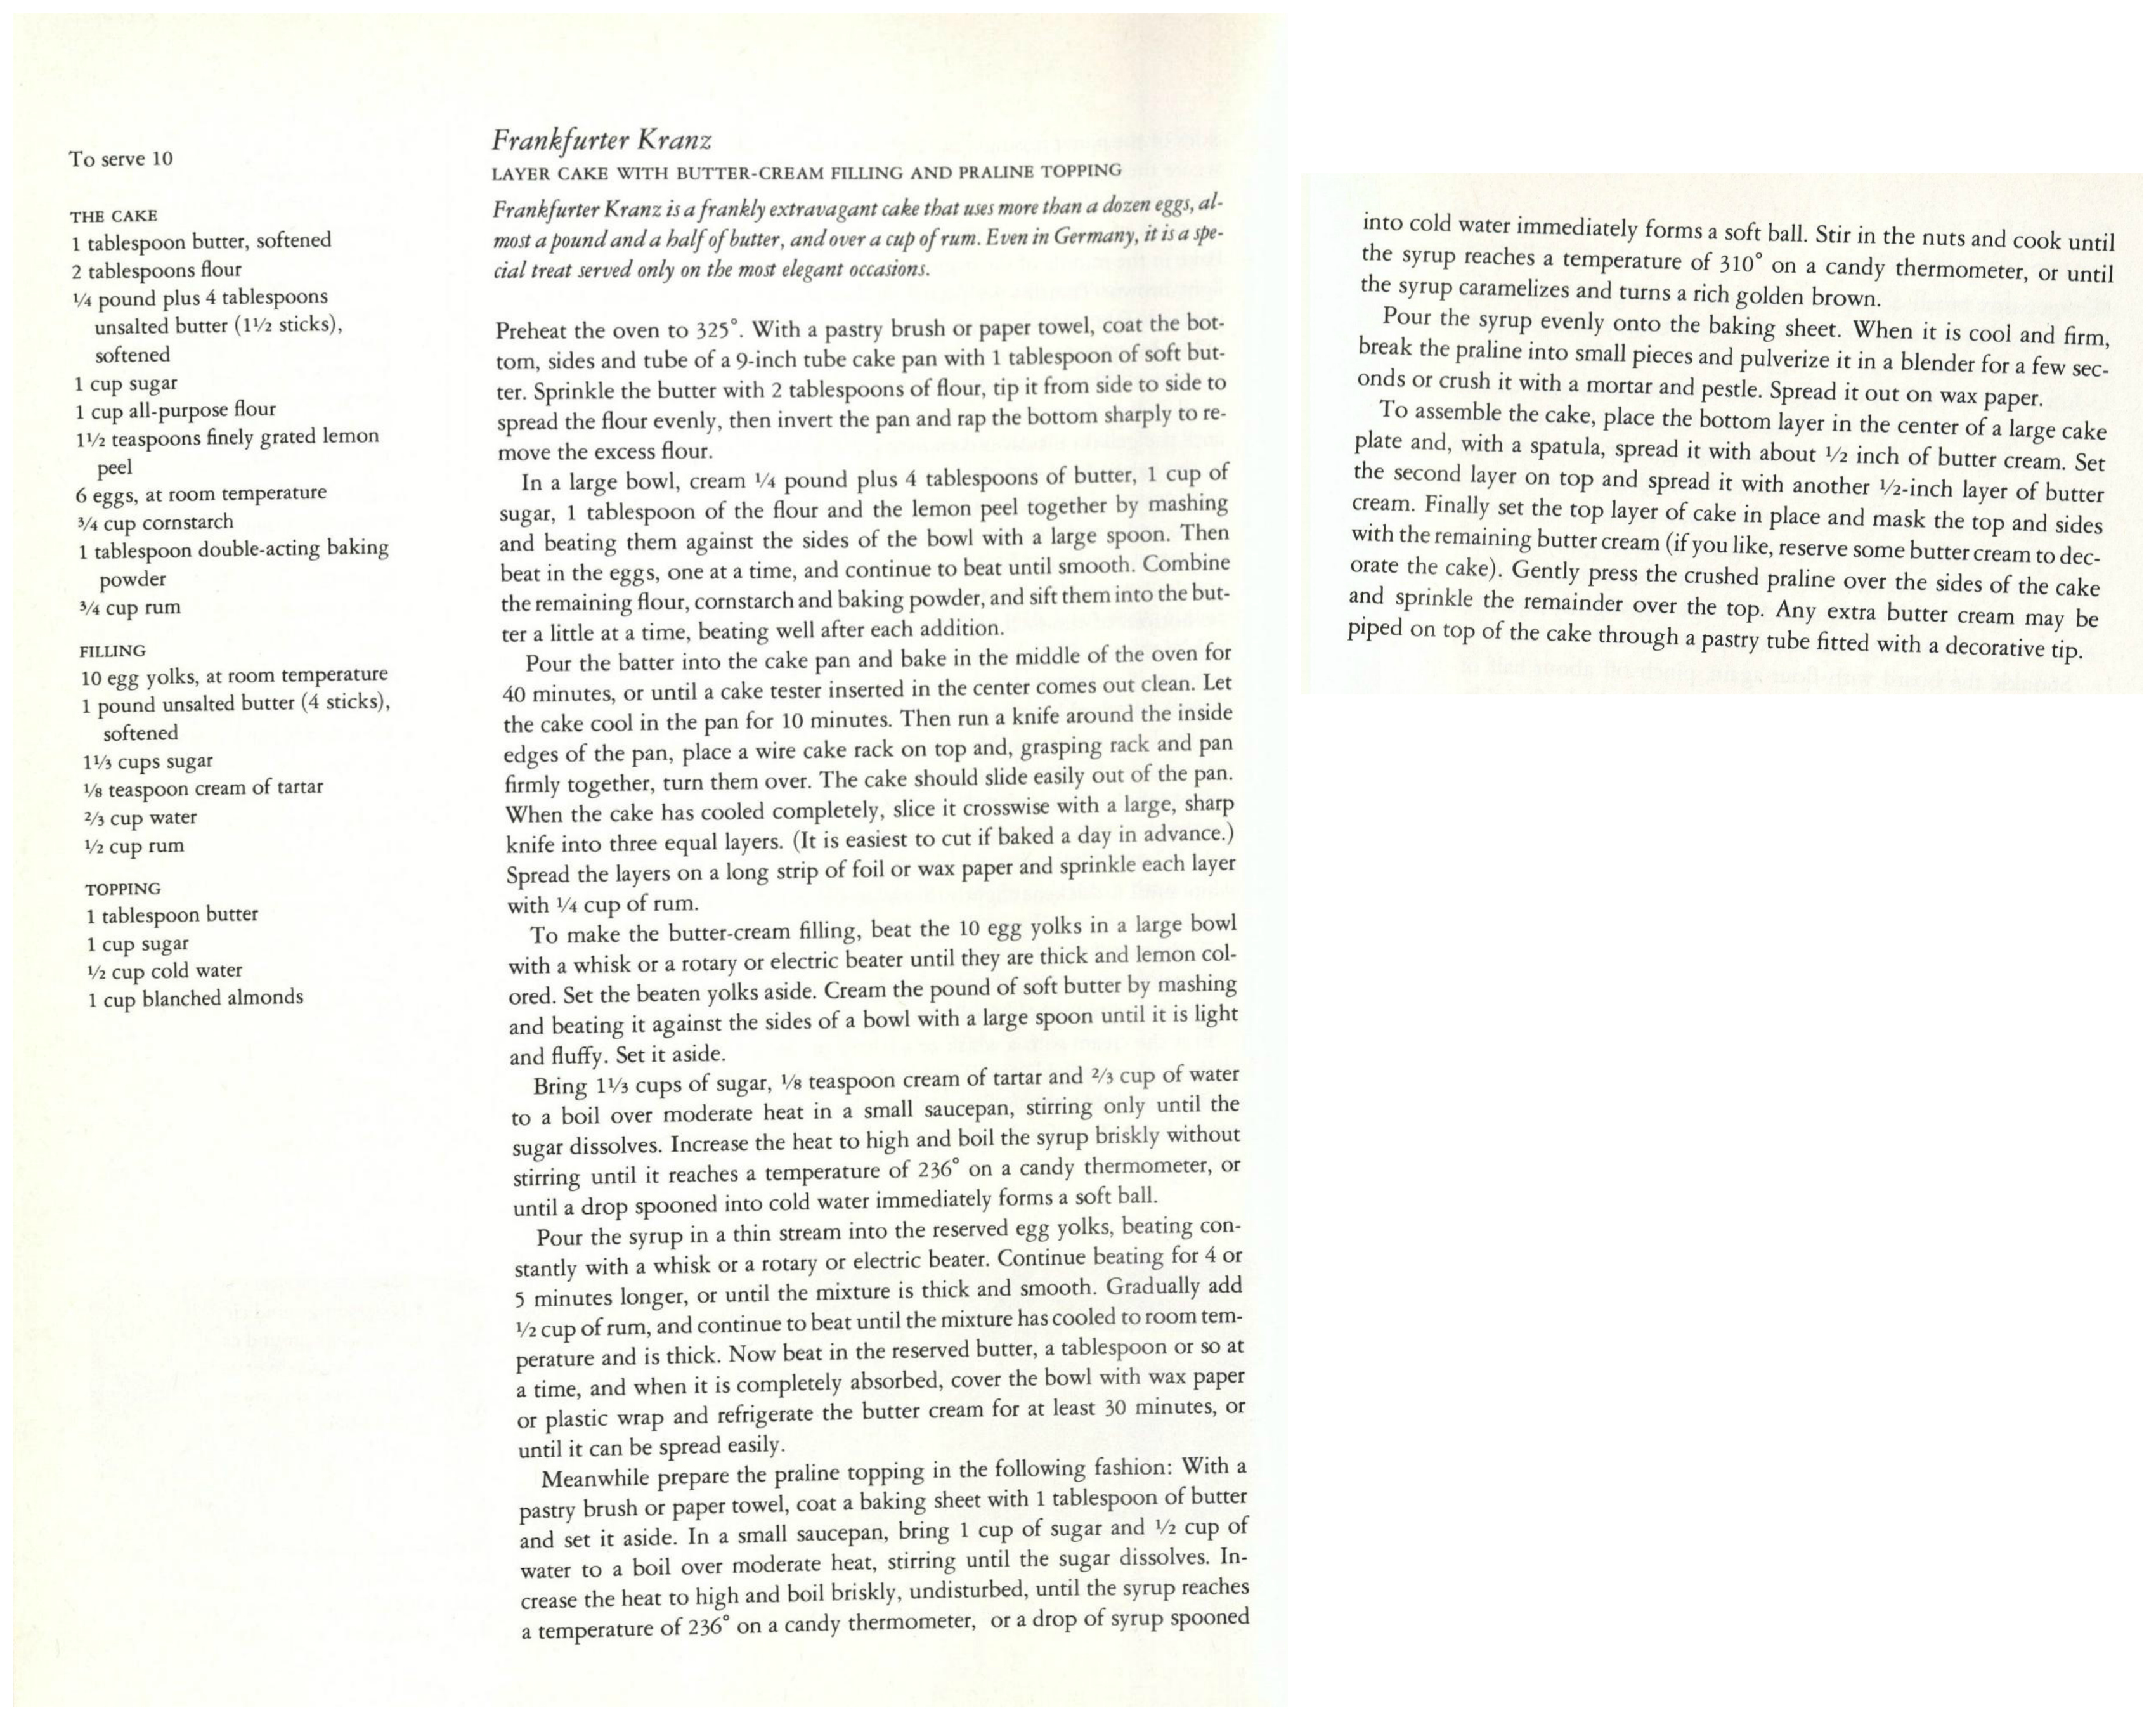 Scanned image of text of recipe